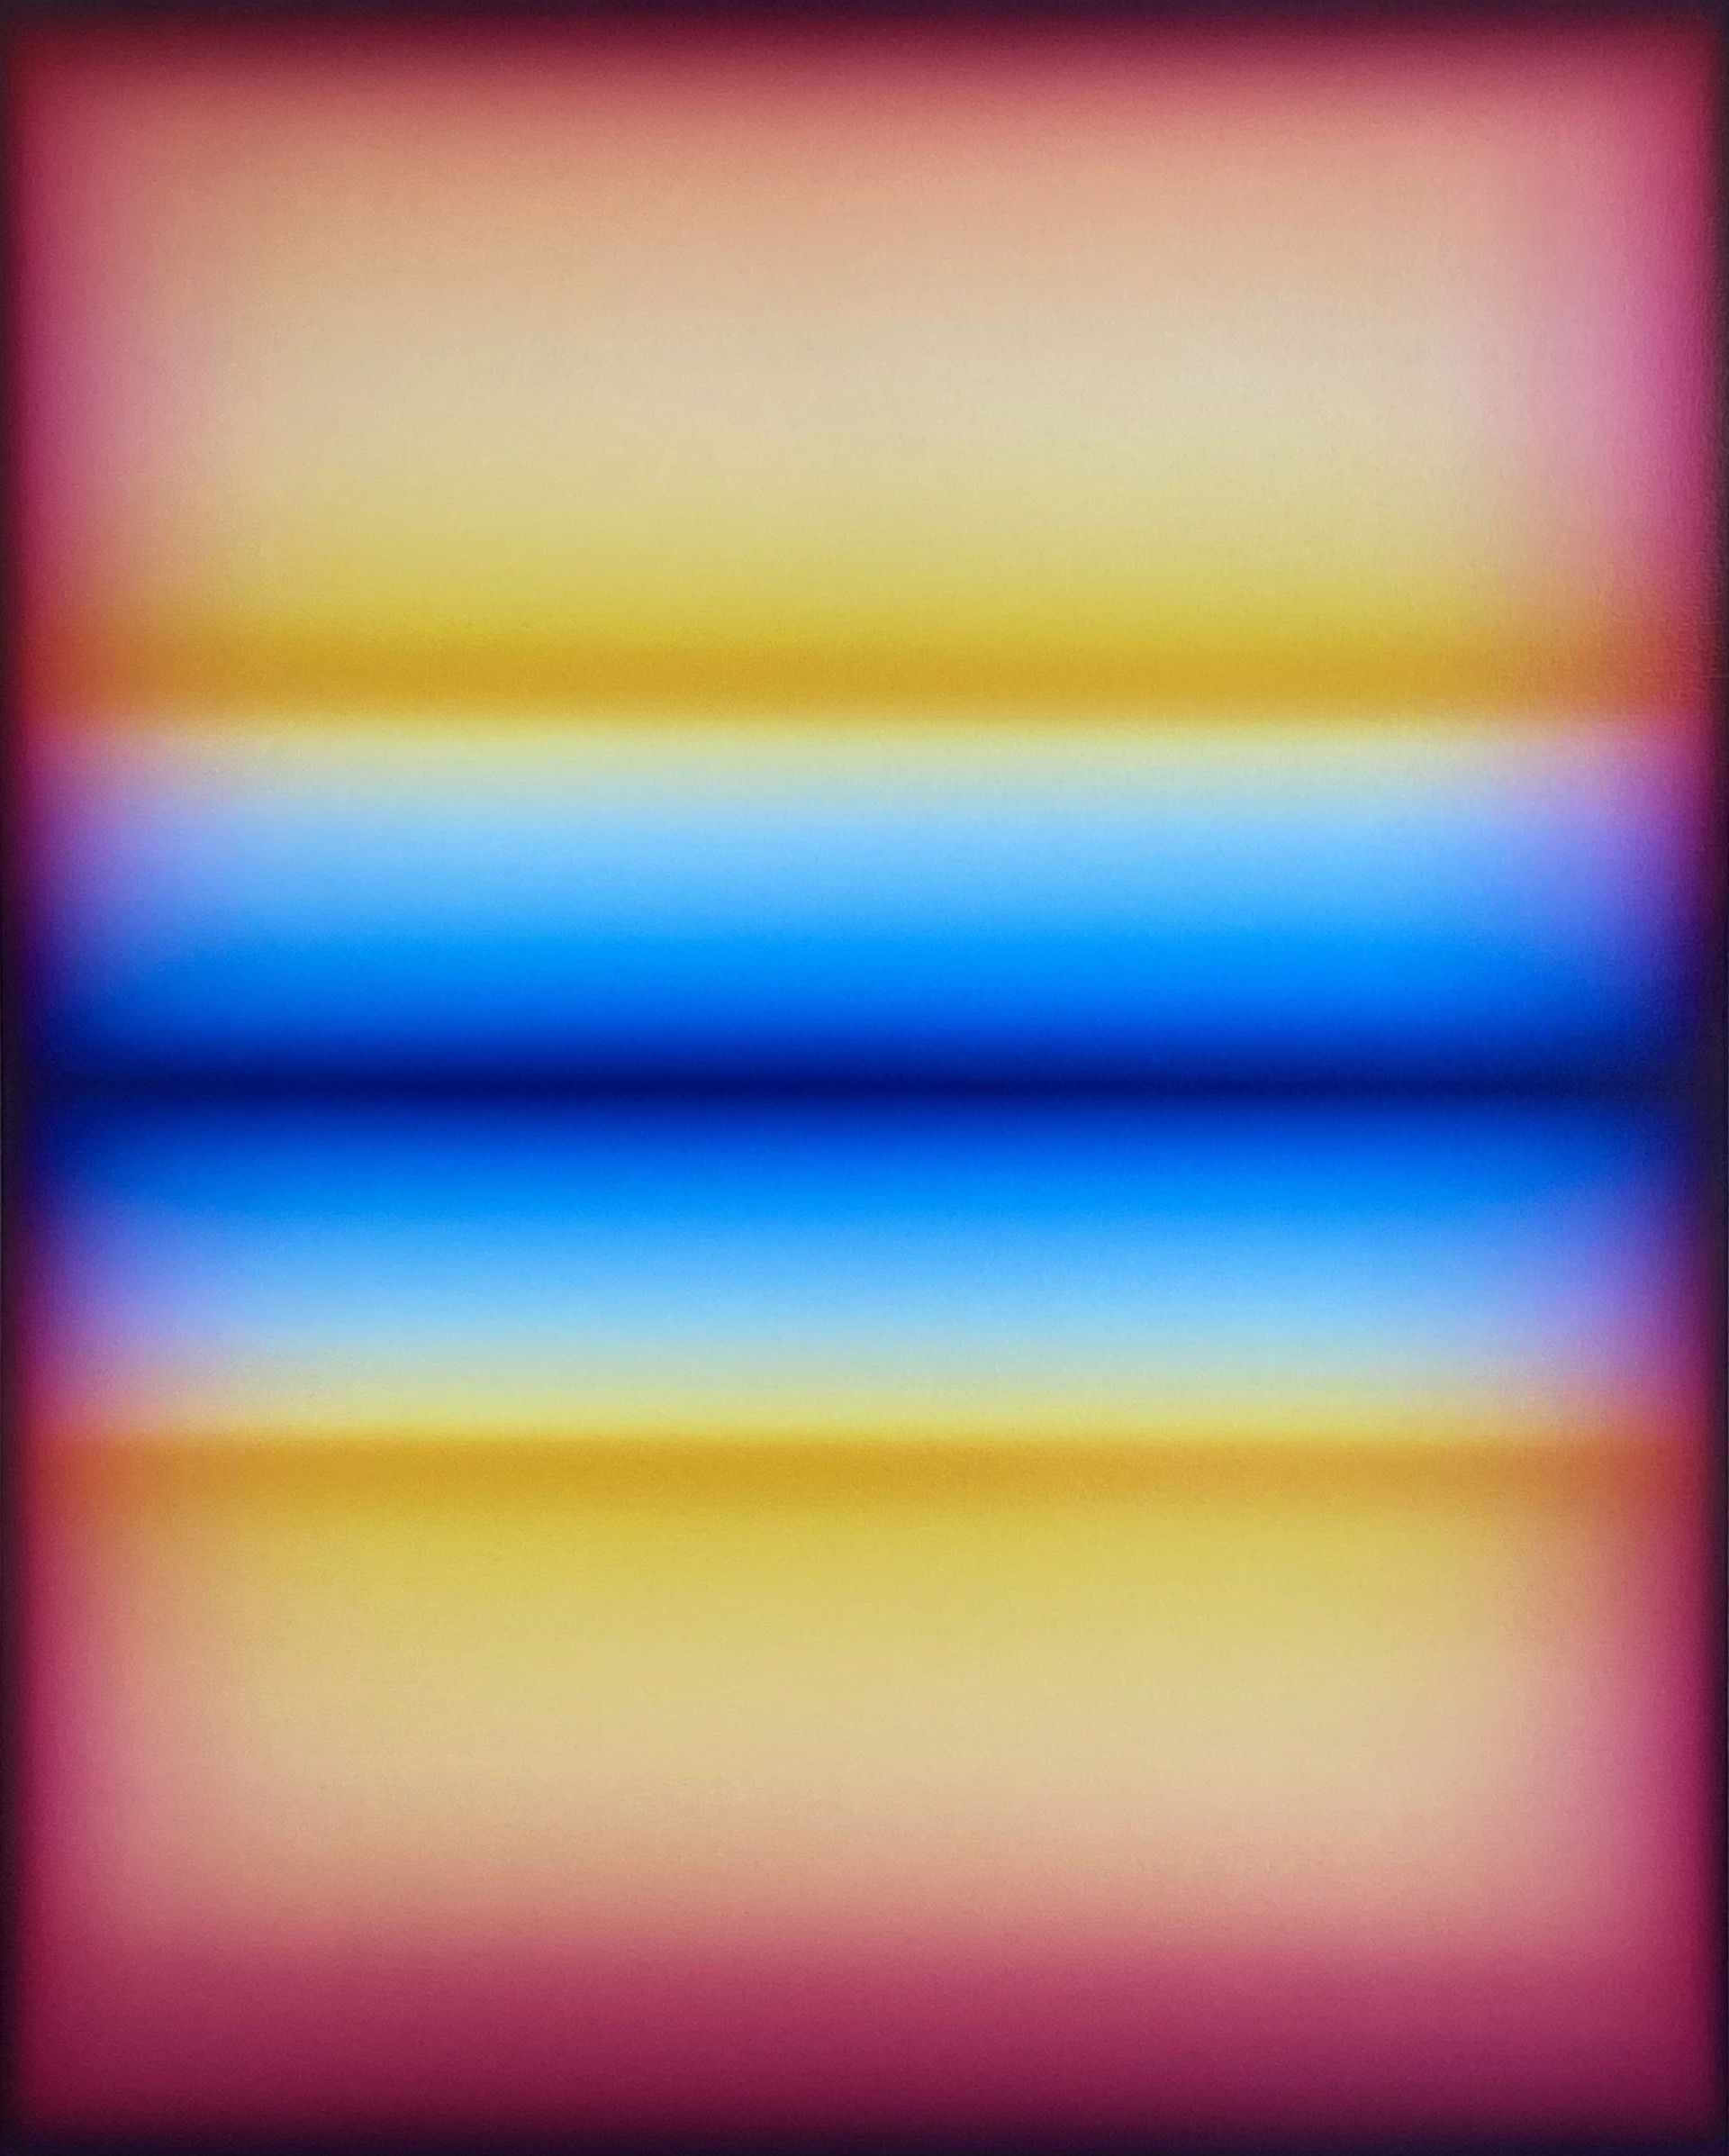 Harmonic Intervals: Red, Blue, Yellow by Patrick DeAngelis